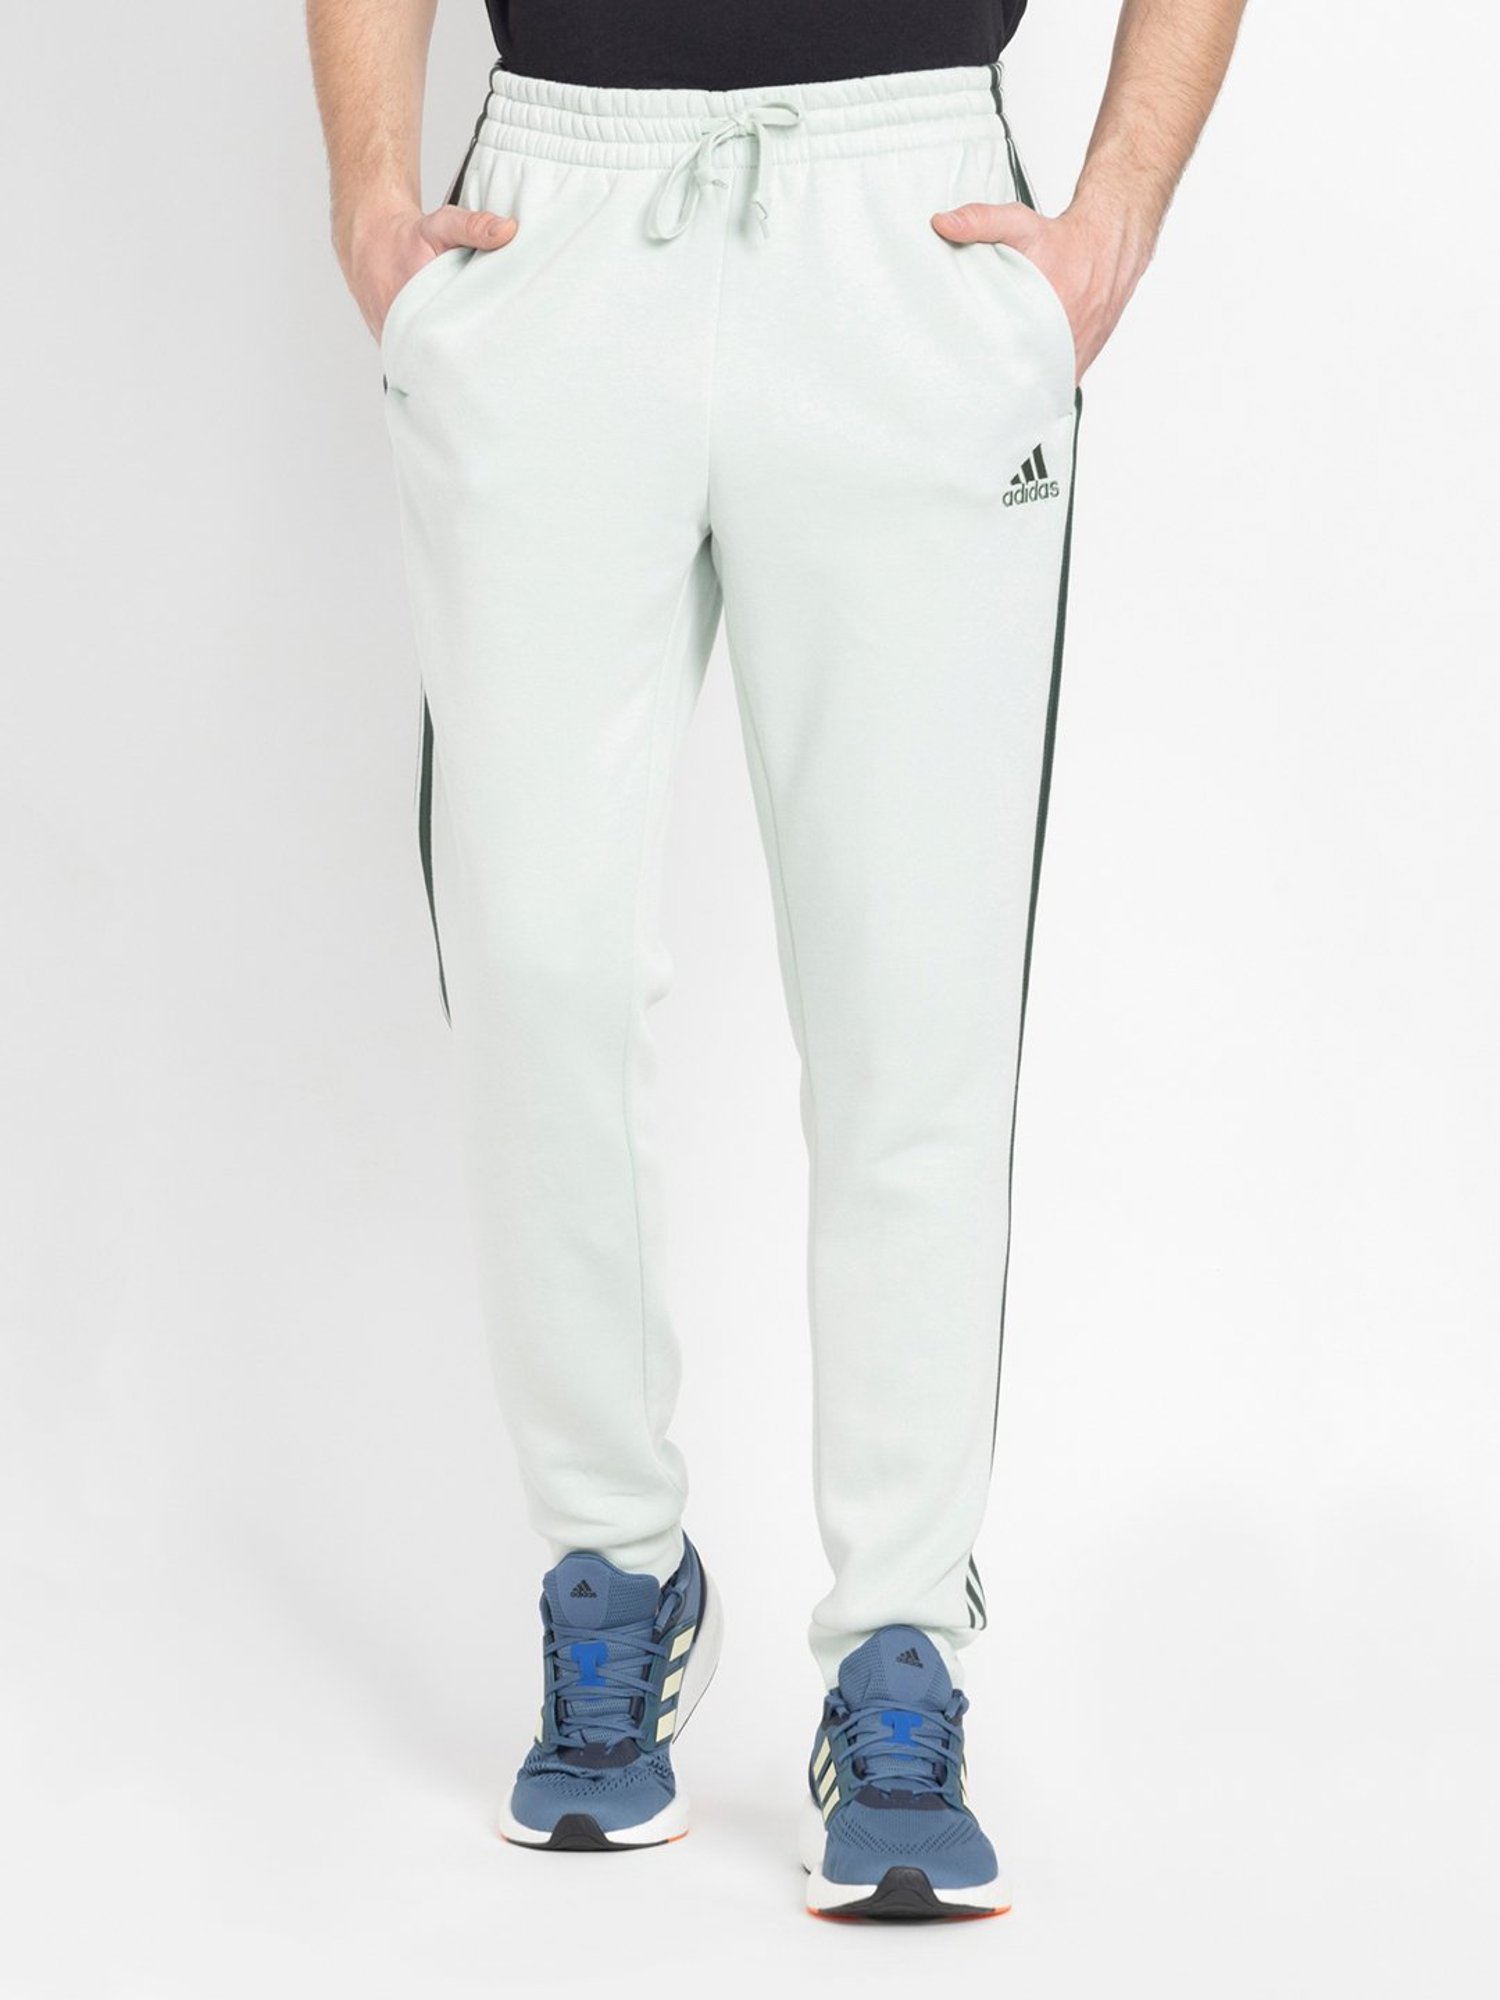 Buy Off White Track Pants for Men by ADIDAS Online  Ajiocom